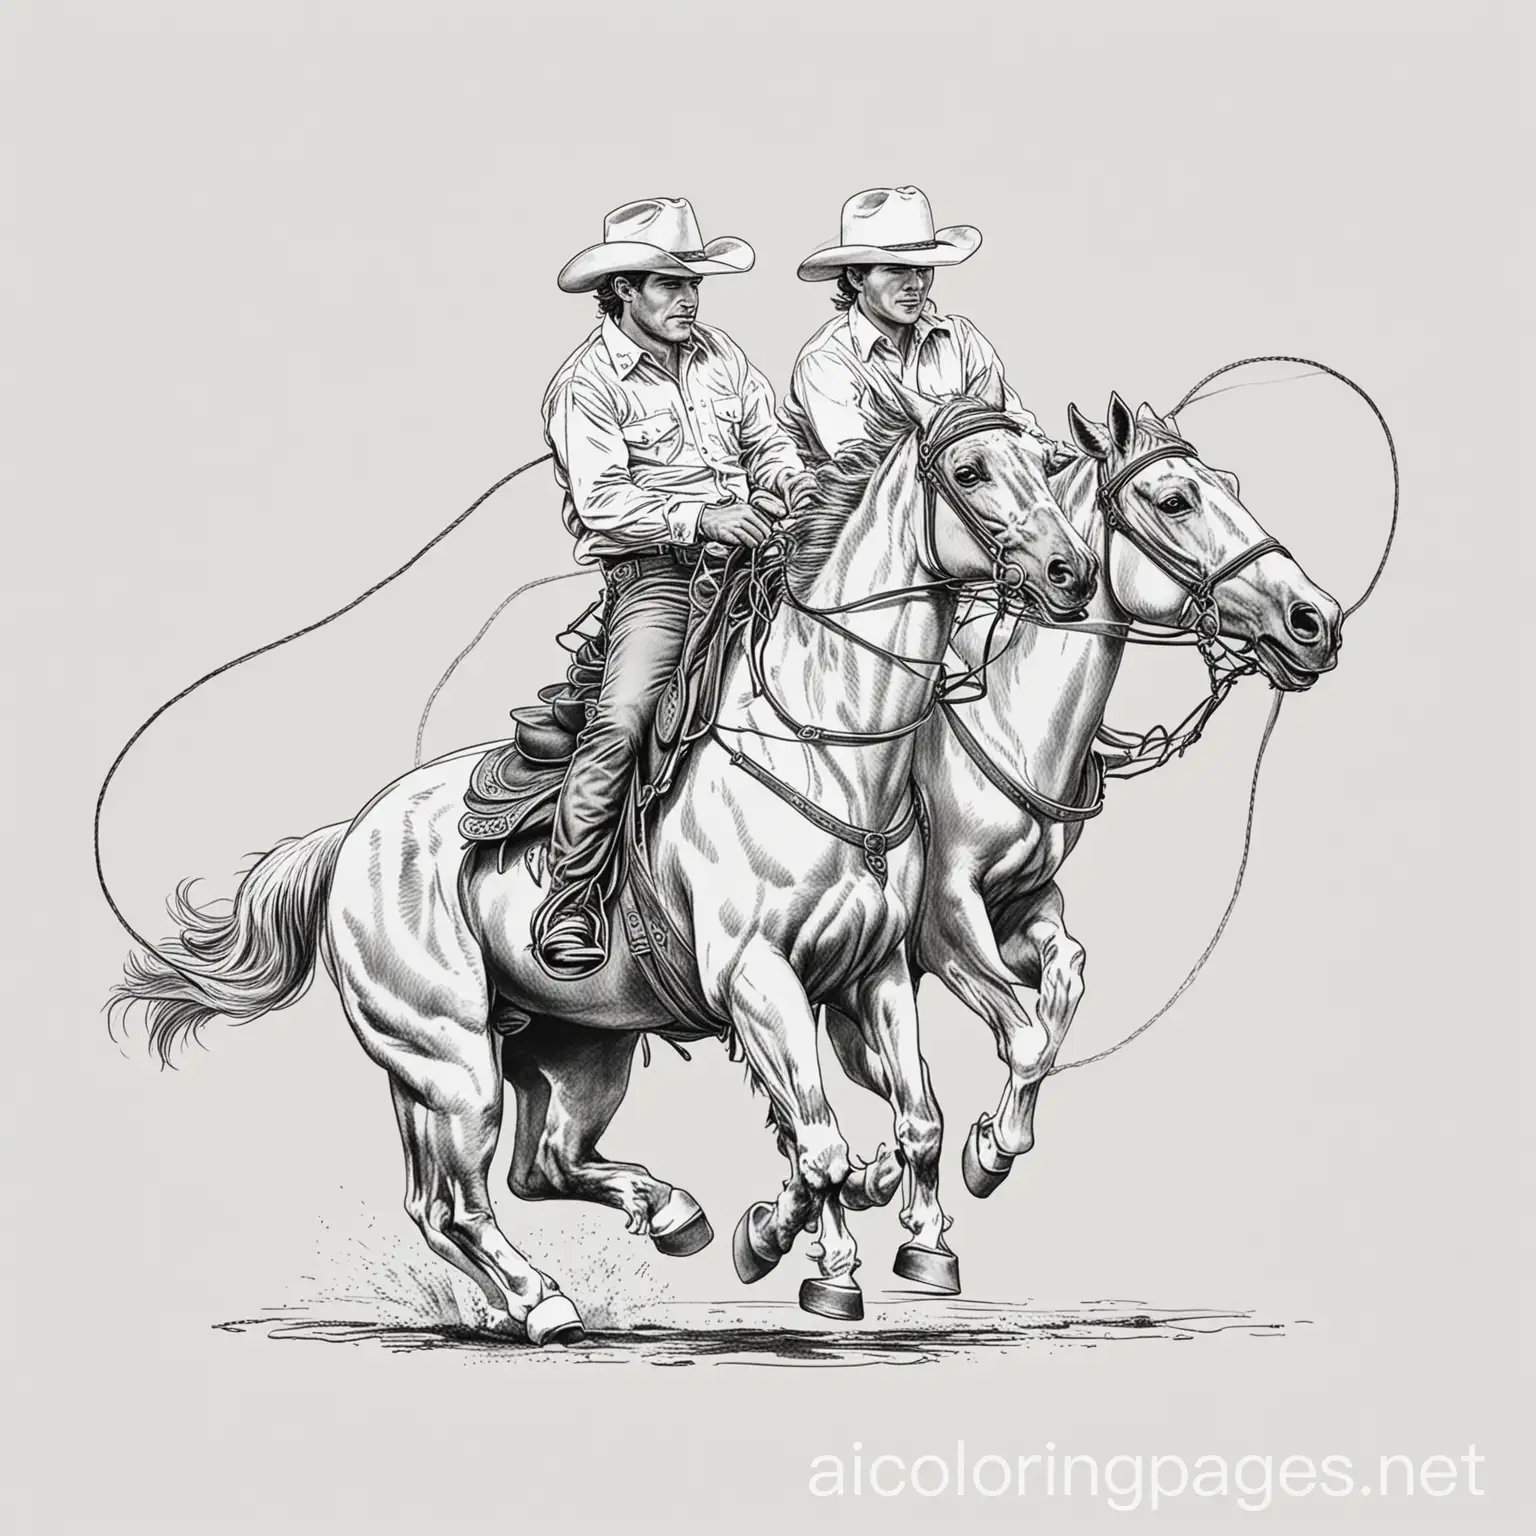 team roping at rodeo coloring page, Coloring Page, black and white, line art, white background, Simplicity, Ample White Space